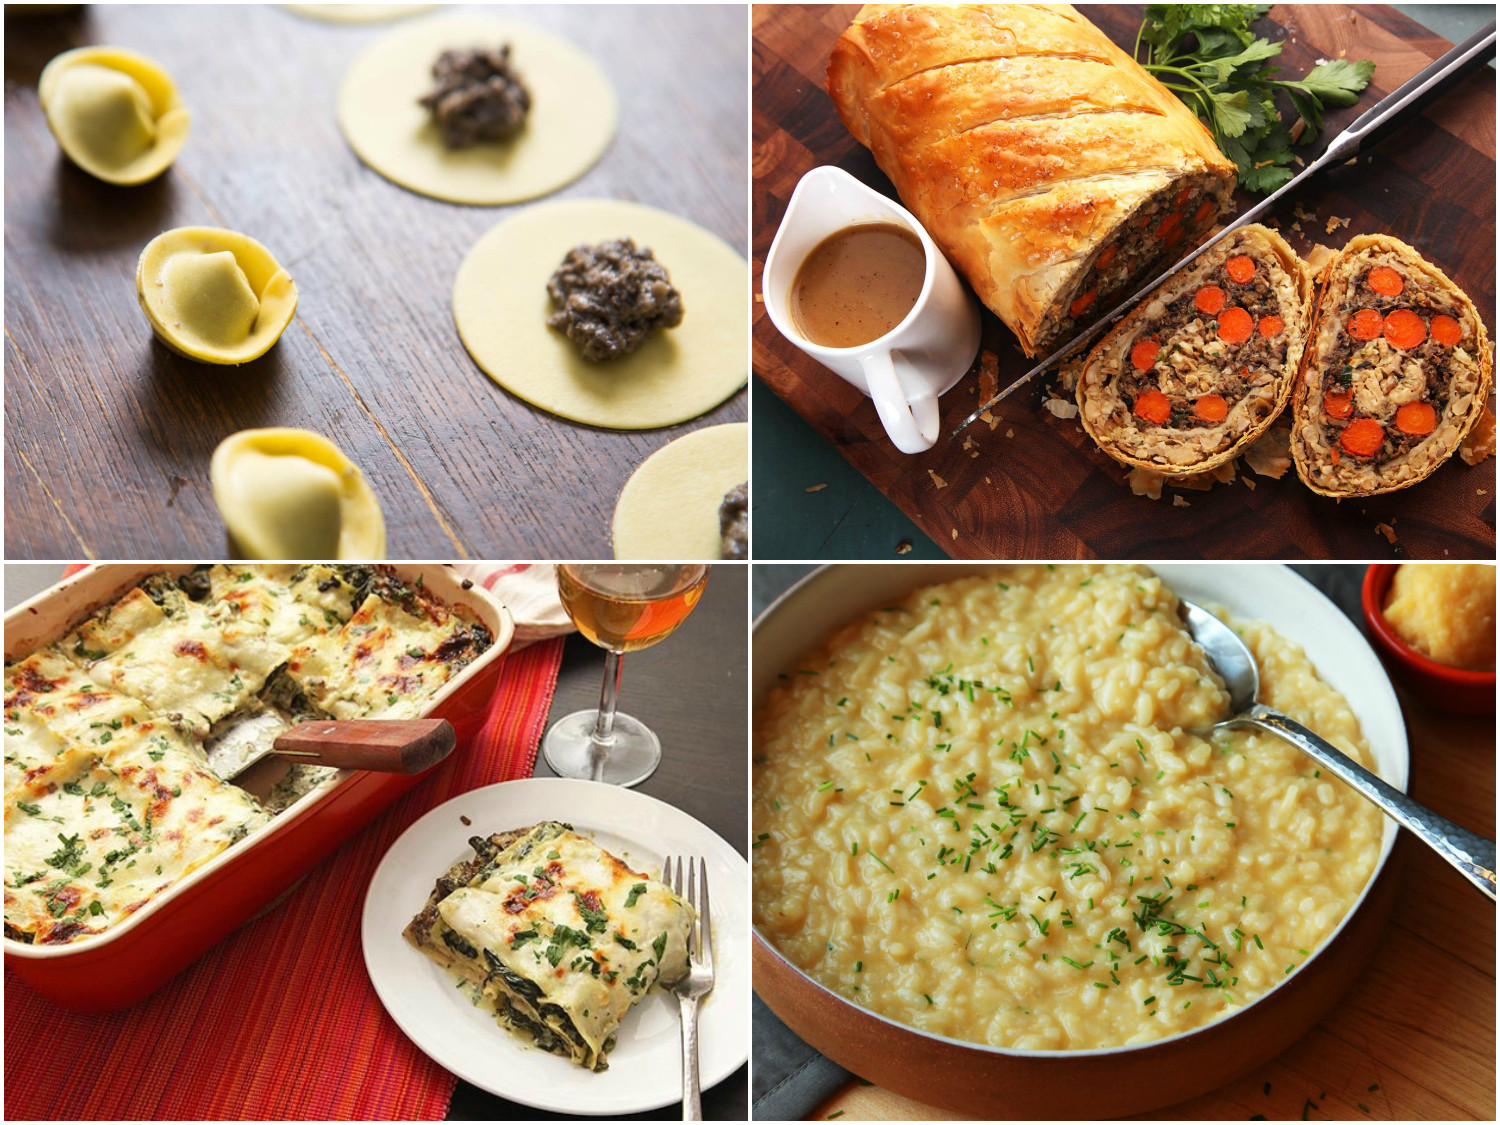 Vegetarian Main Dishes For Christmas
 13 Festive Ve arian Main Dishes That Even Omnivores Will